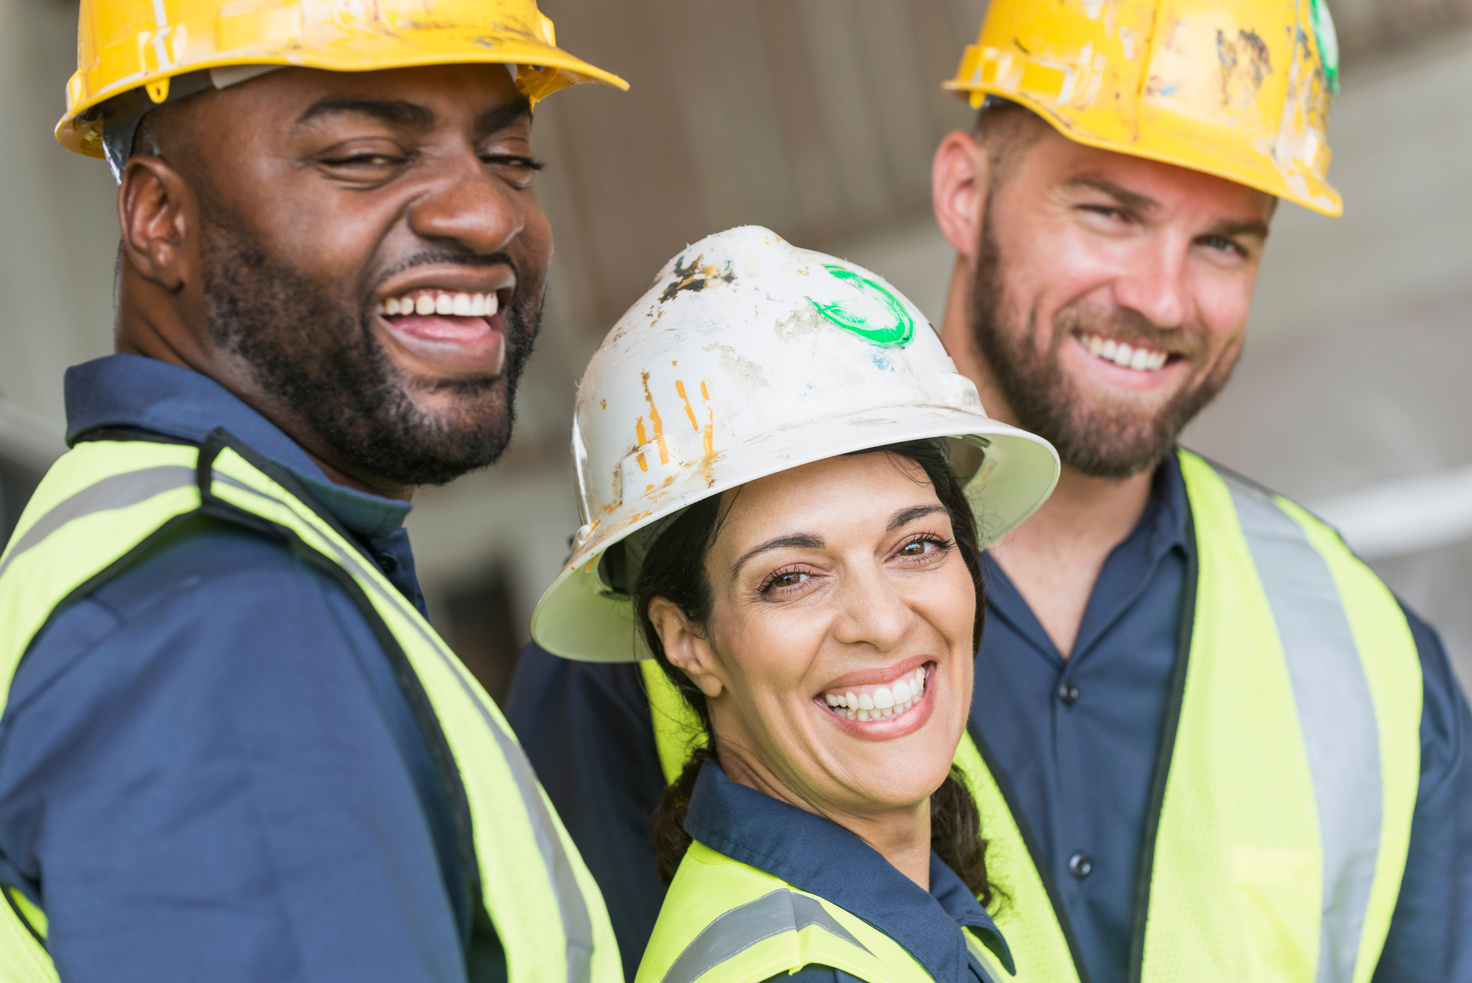 Woman with diverse group of construction workers